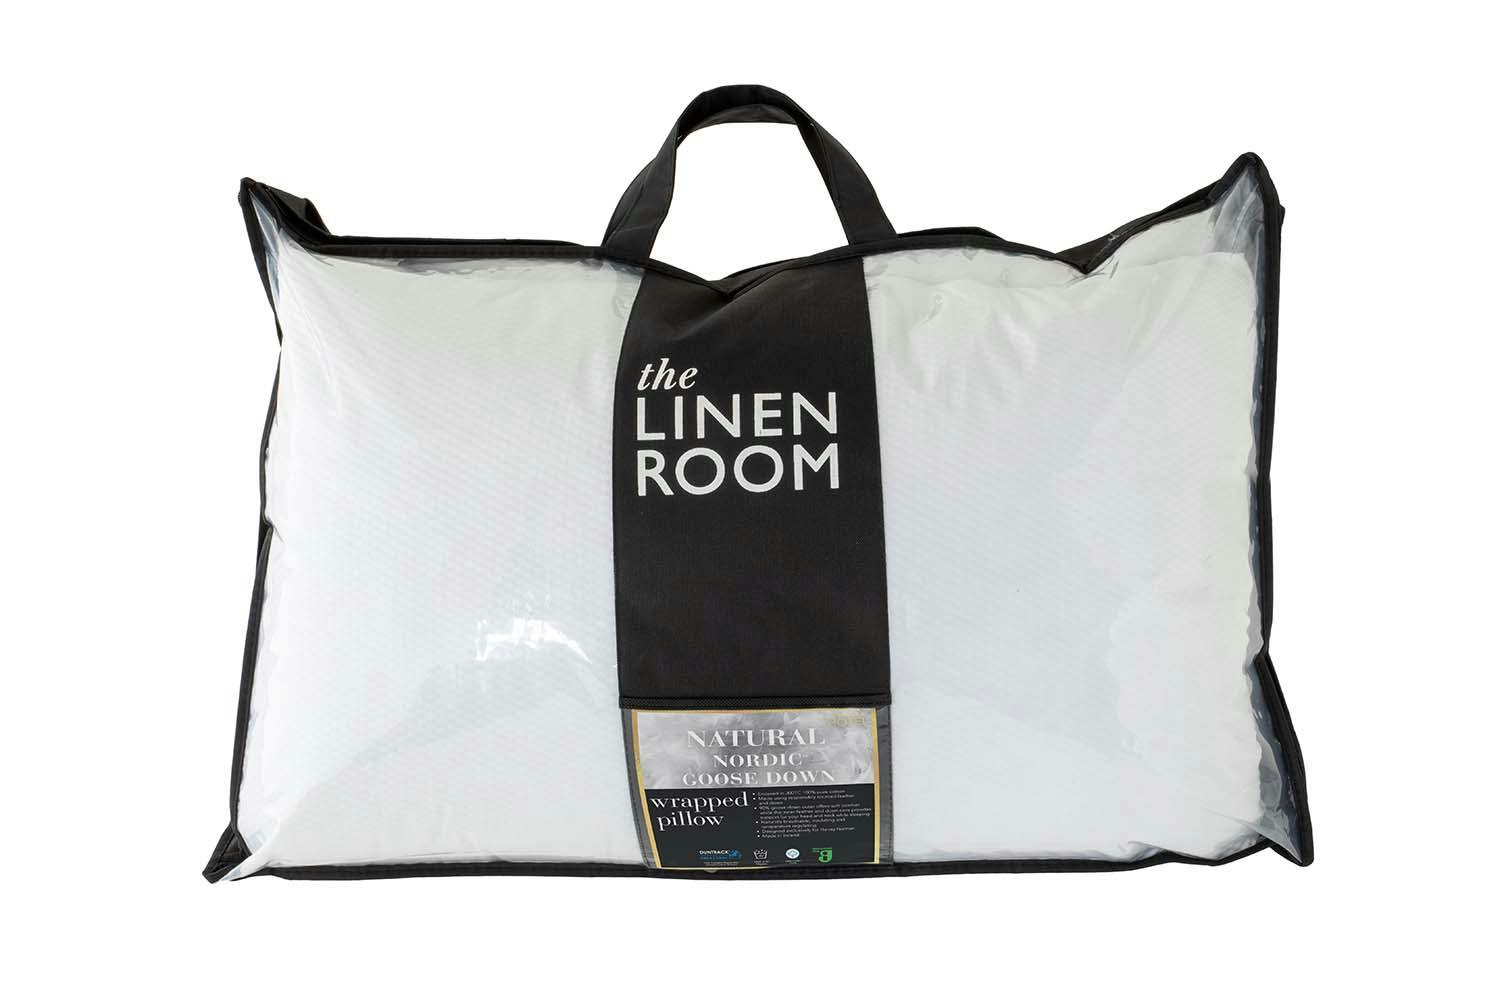 The Linen Room | Nordic Goose Down Wrapped | Pillow